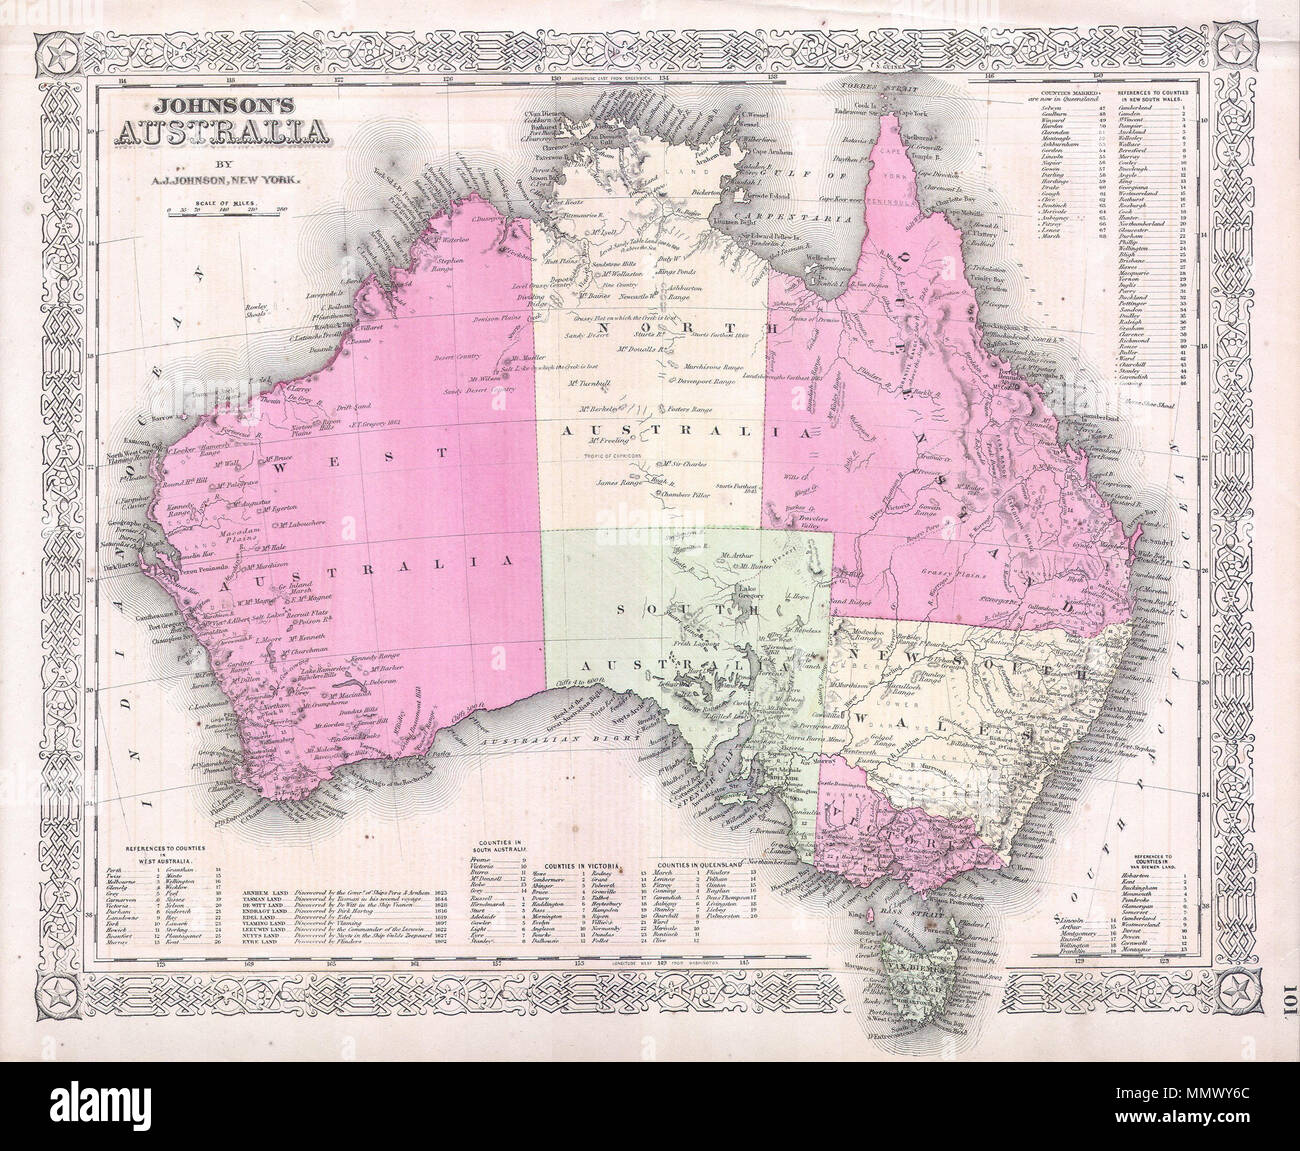 .  English: This magnificent 1865 hand colored map of Australia was published by American mapmaker A. J. Johnson. Possibly the finest mid 19th century American map of Australia ever published. Depicts the continent detailing both political and geological features – dry river beds, lost rivers, mountains, etc. Represents the third state of the Johnson’s Australia series.  Johnson’s Map of Australia. 1865. 1865 Johnson Map of Australia - Geographicus - Australia-j-65 Stock Photo